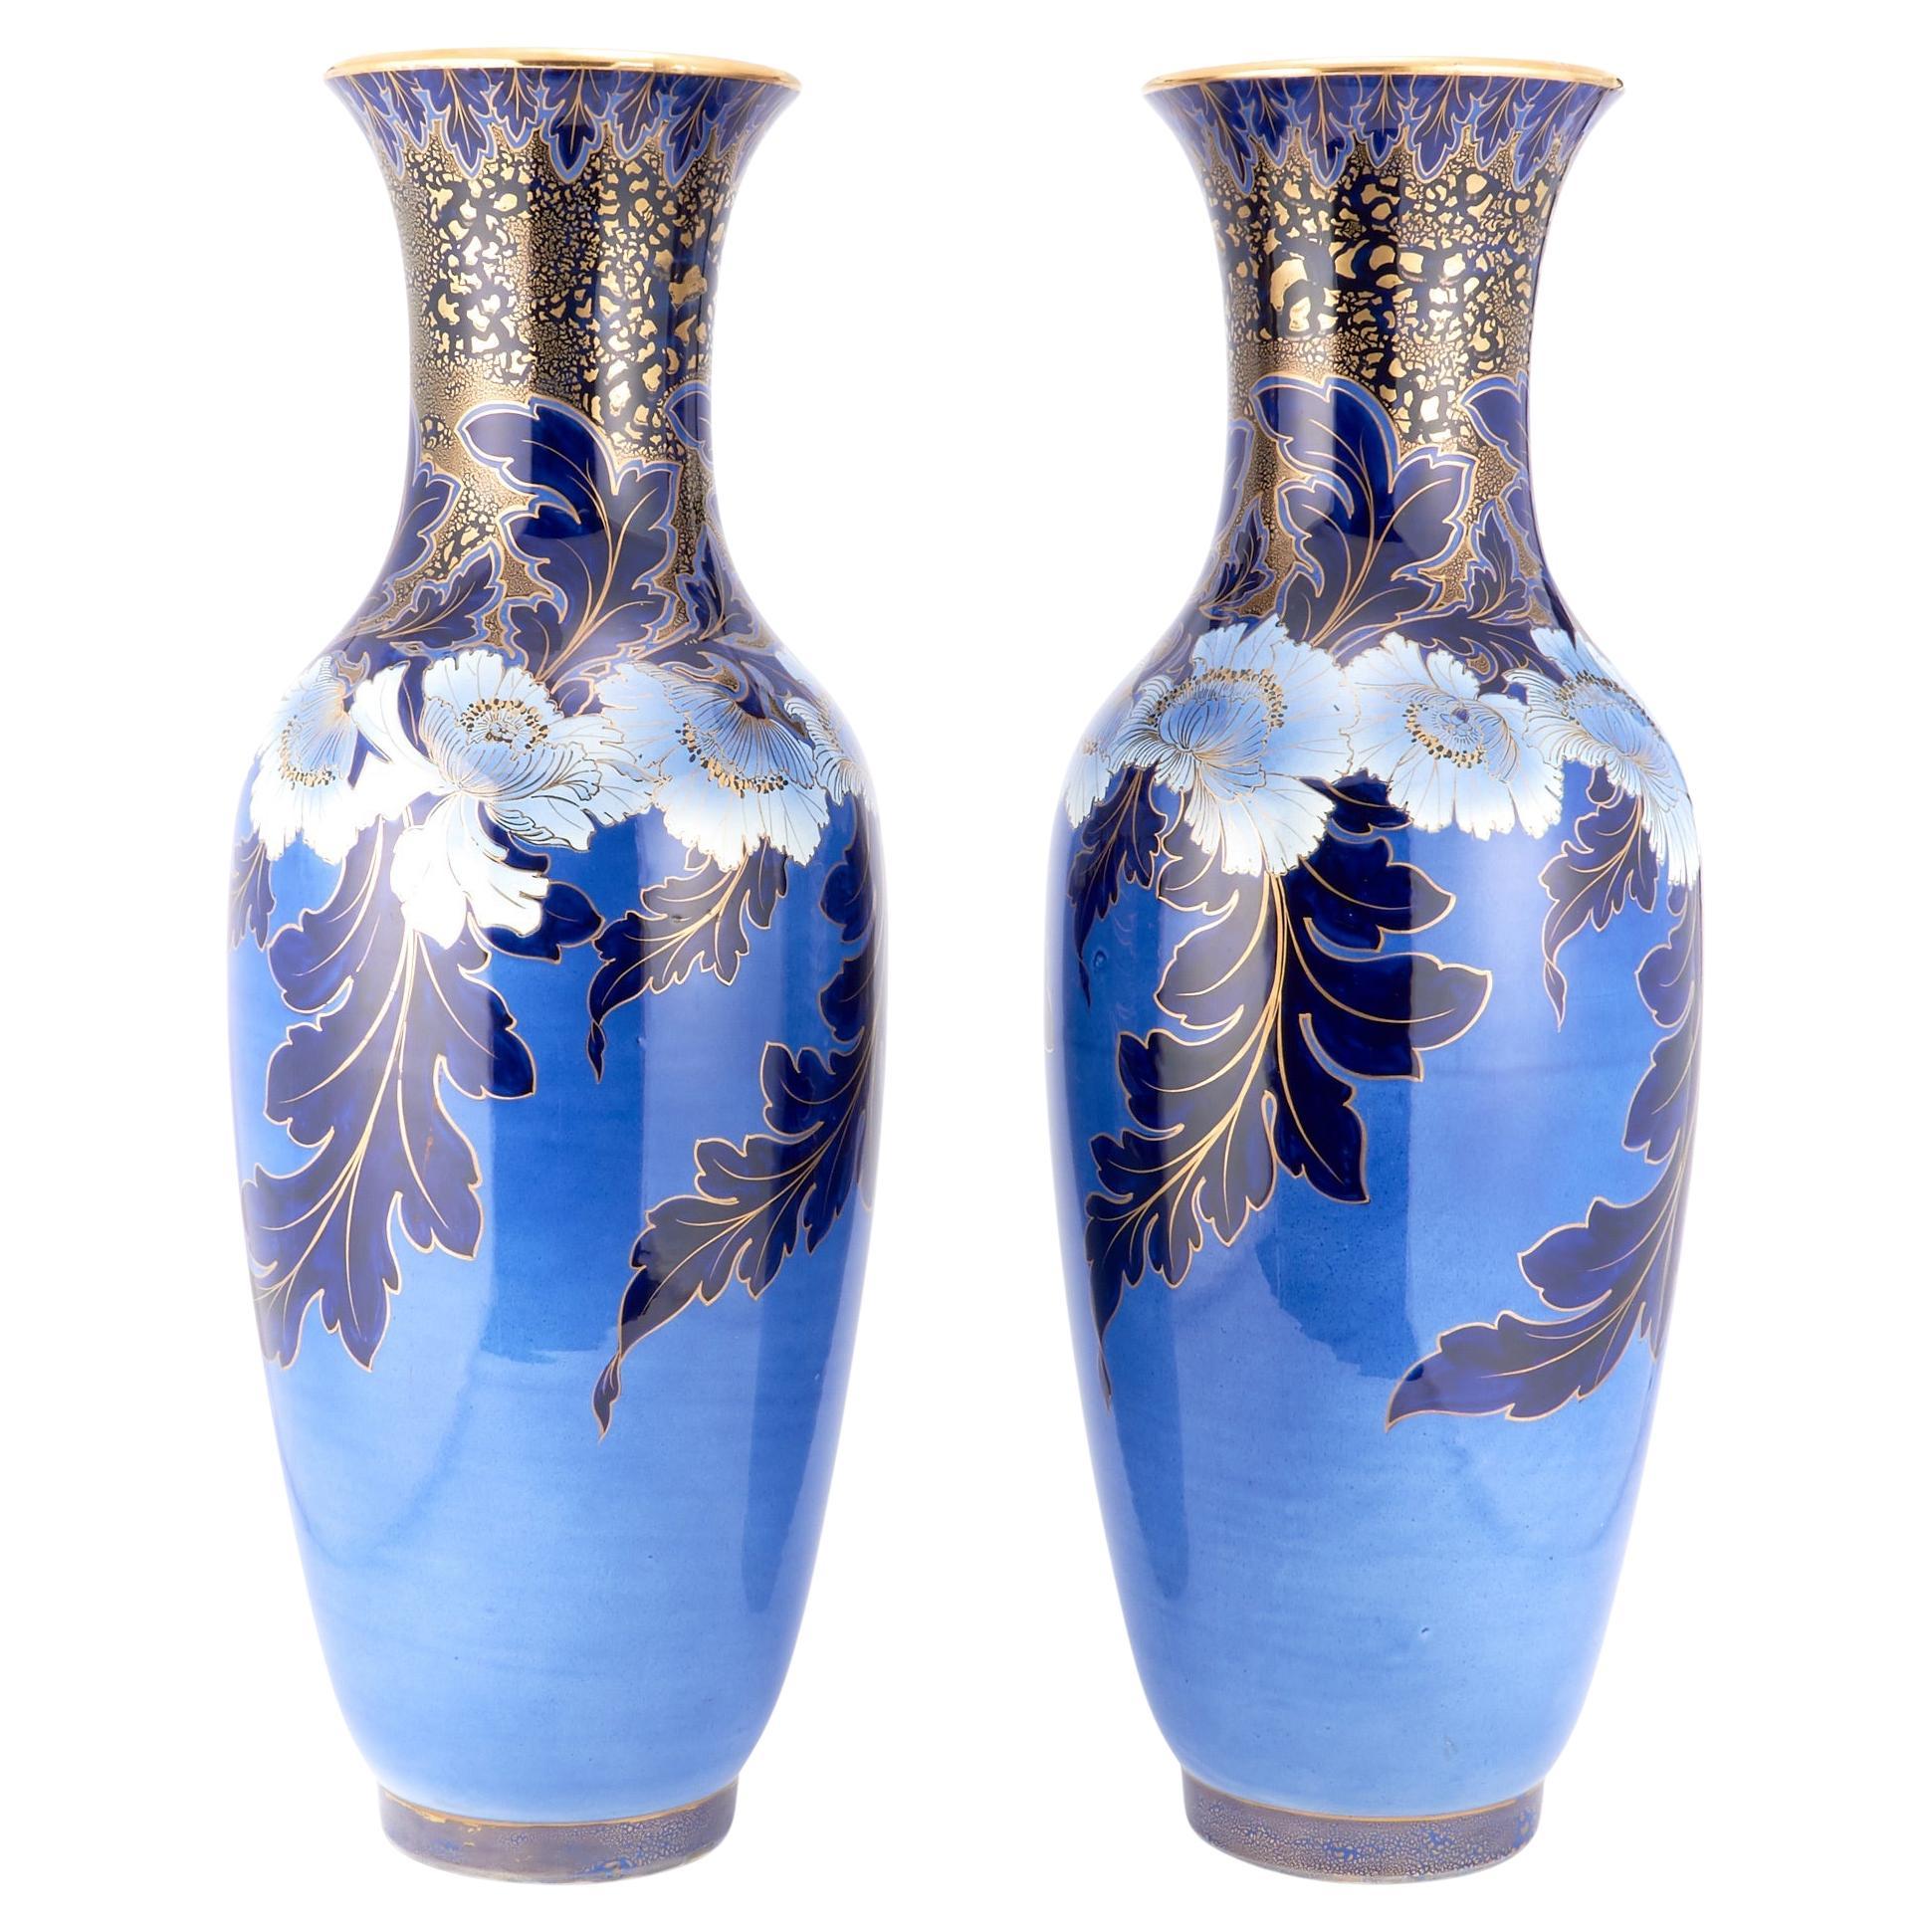 19th Century Large Art Nouveau Style Hand-Painted & Gilt Decorated Vases / Urns For Sale